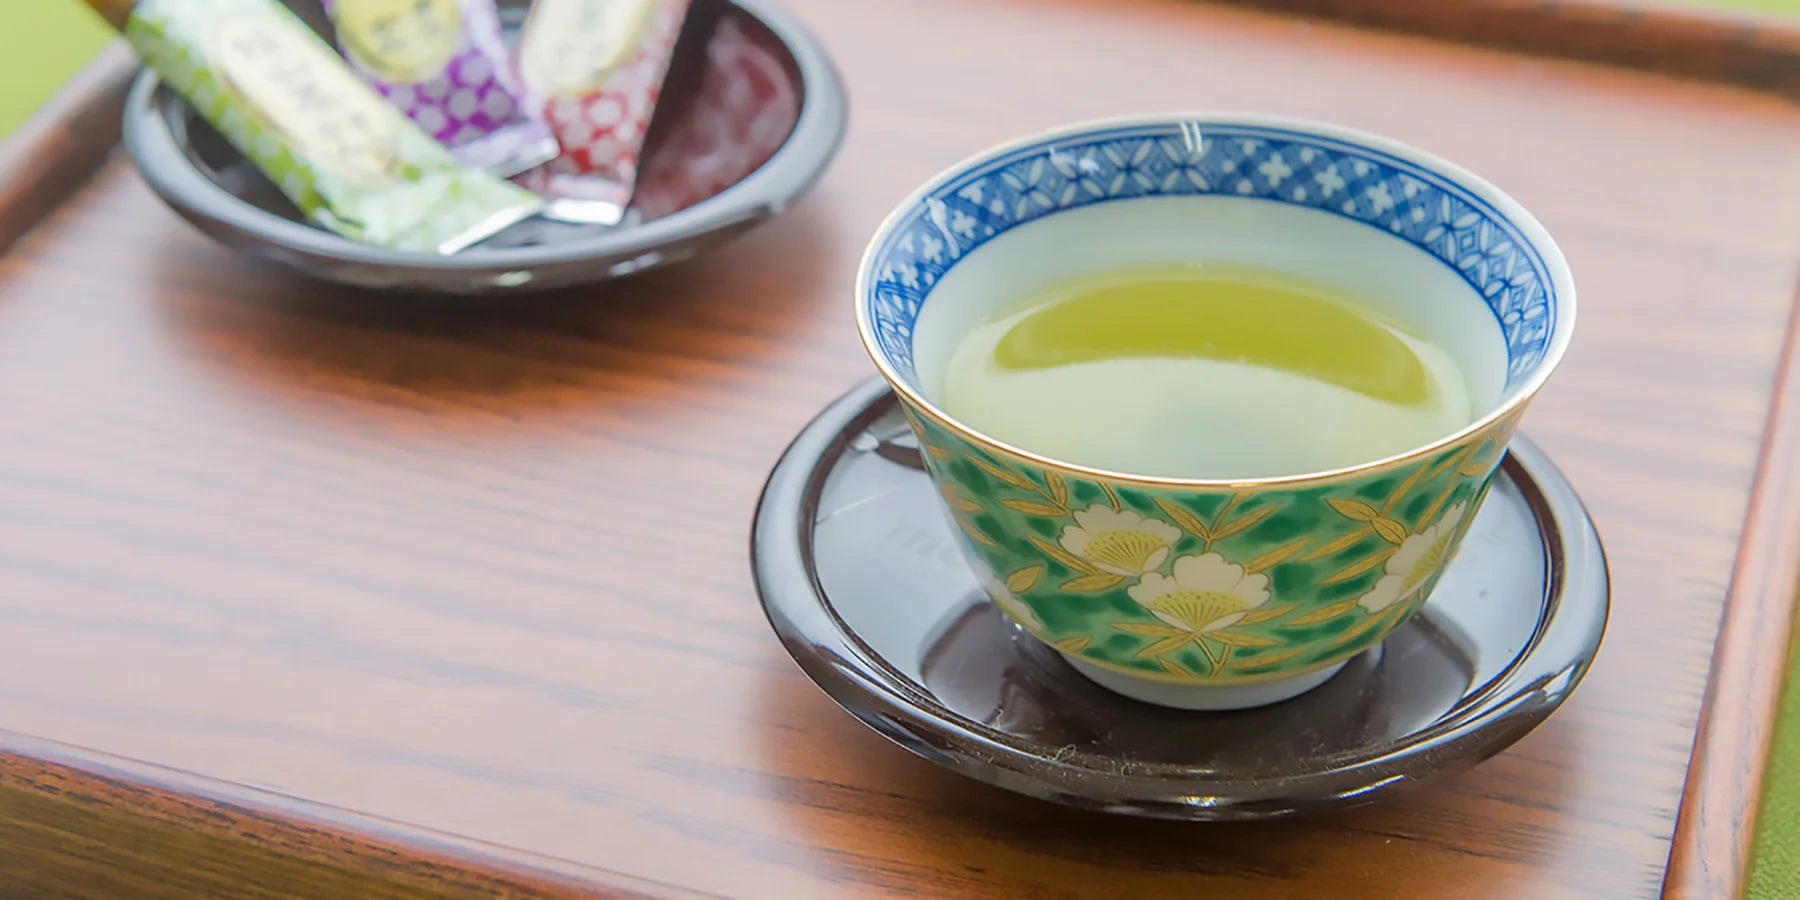 Discover our great selection of Tea & Infusions at Globalkitchen Japan.